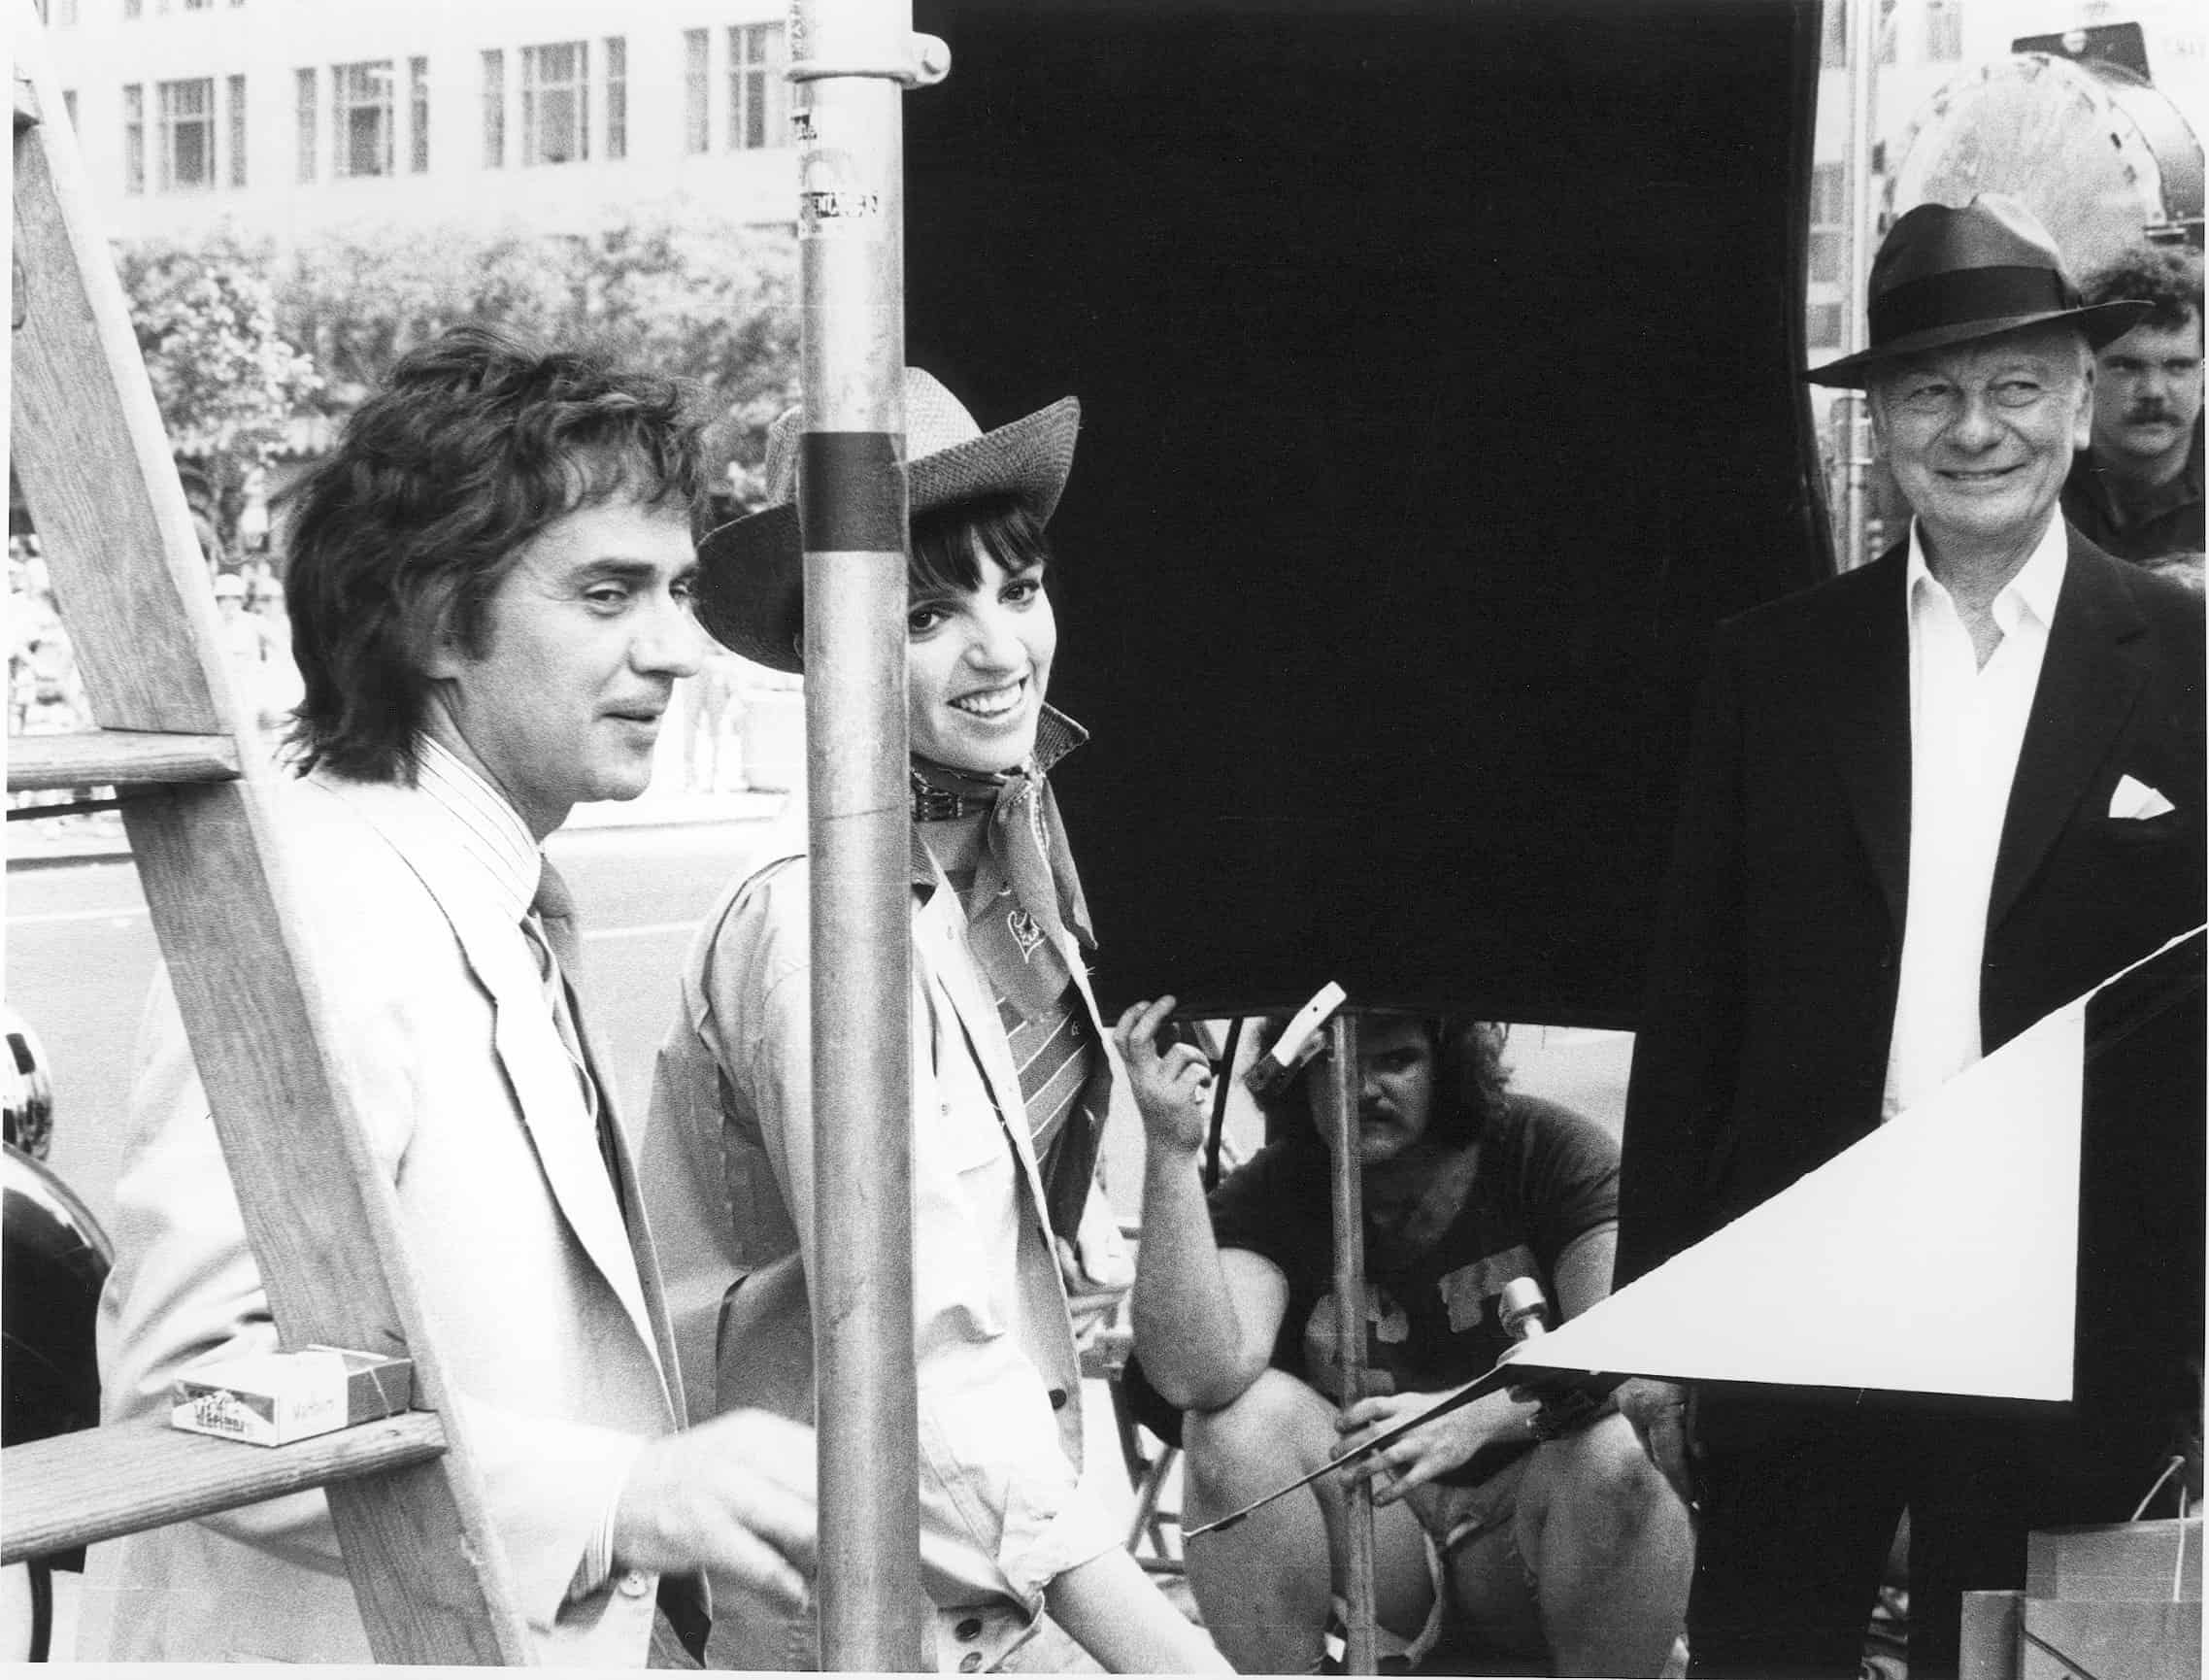 Dudley Moore, Liza Minnelli and Sir John Gielgud on the set of "Arthur" filming in New York City 1979